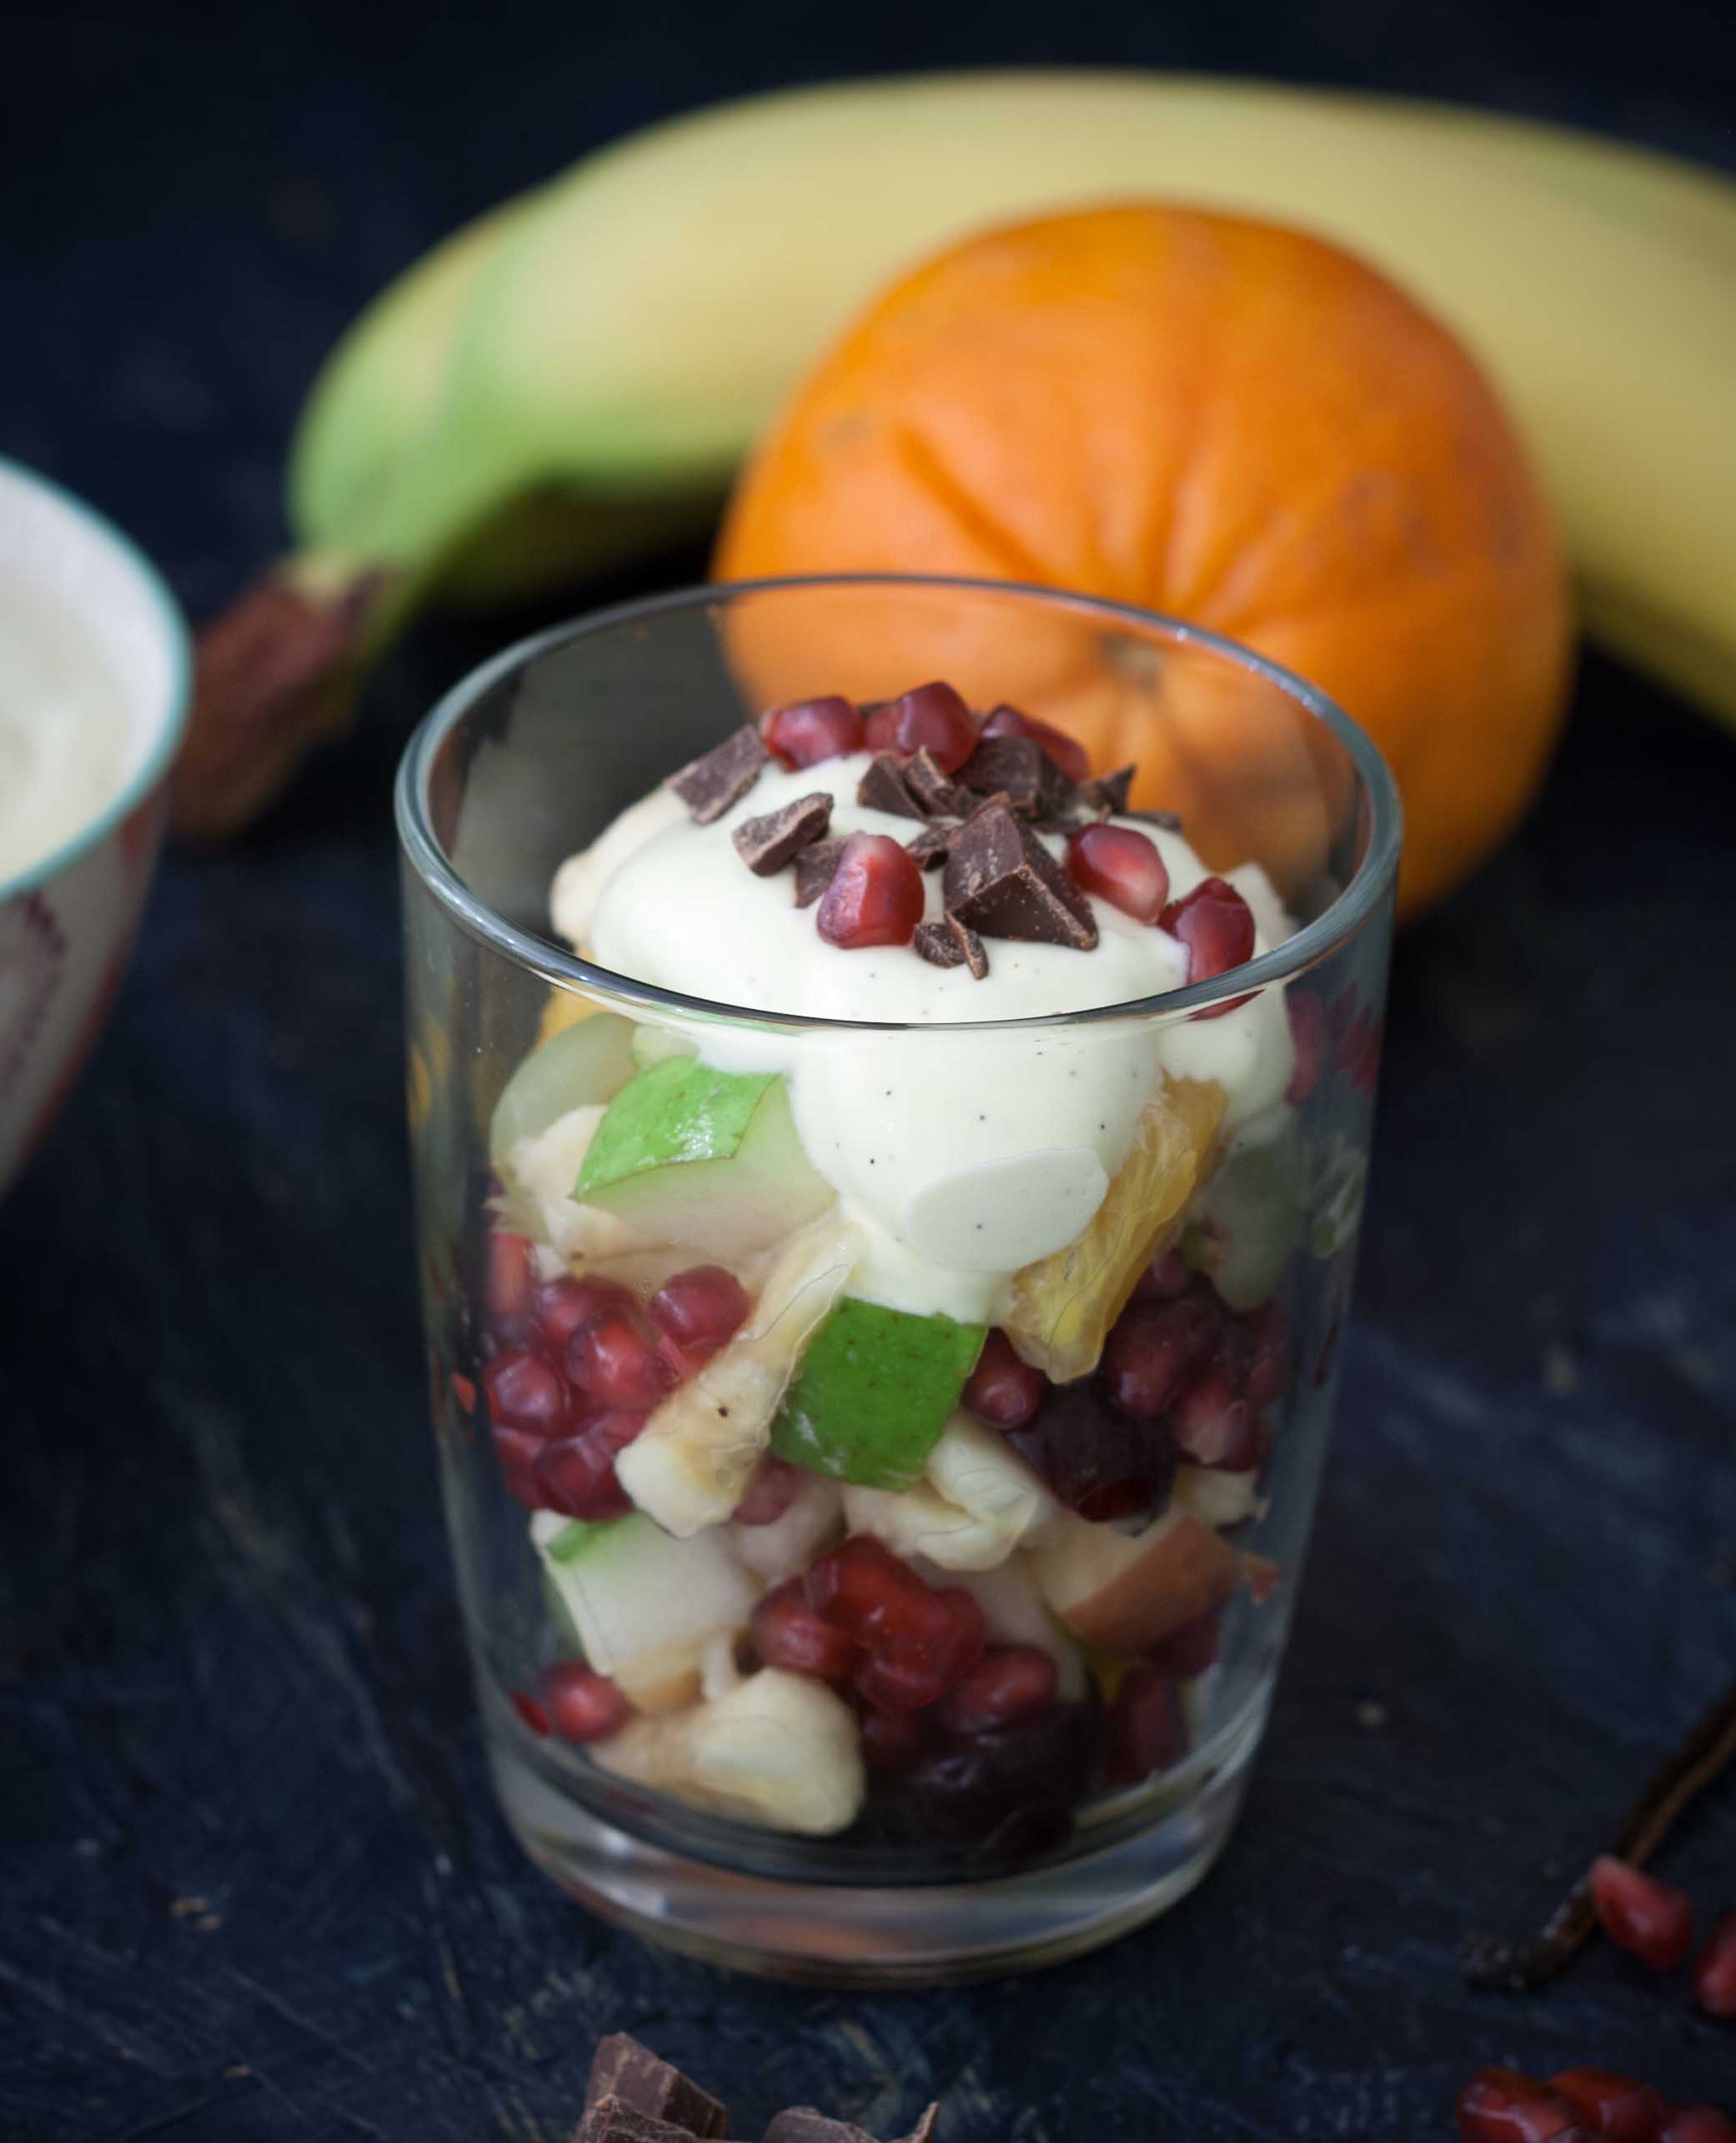 Recipe for Homemade Fruit Salad with Vanilla Cream and Chocolate